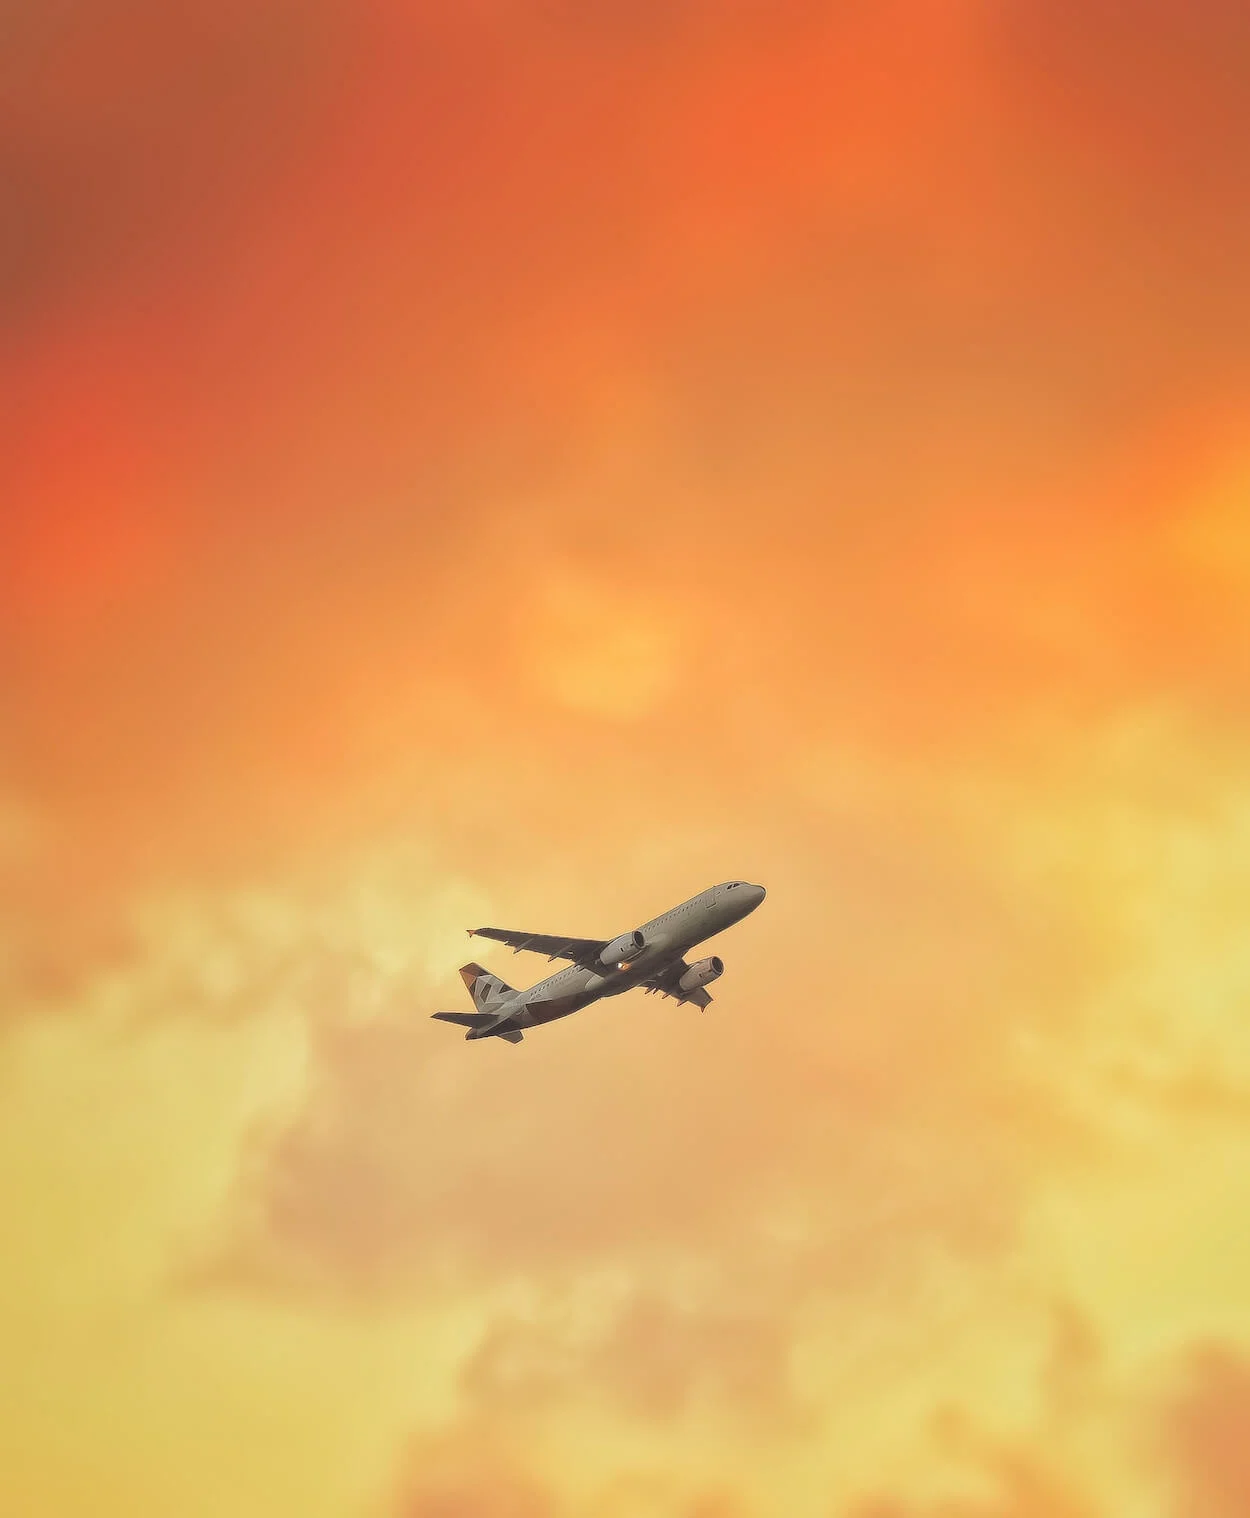 Essential Tips for Long Flights final image of a plane flying in the sky surrounded by a orange and yellow sunset sky